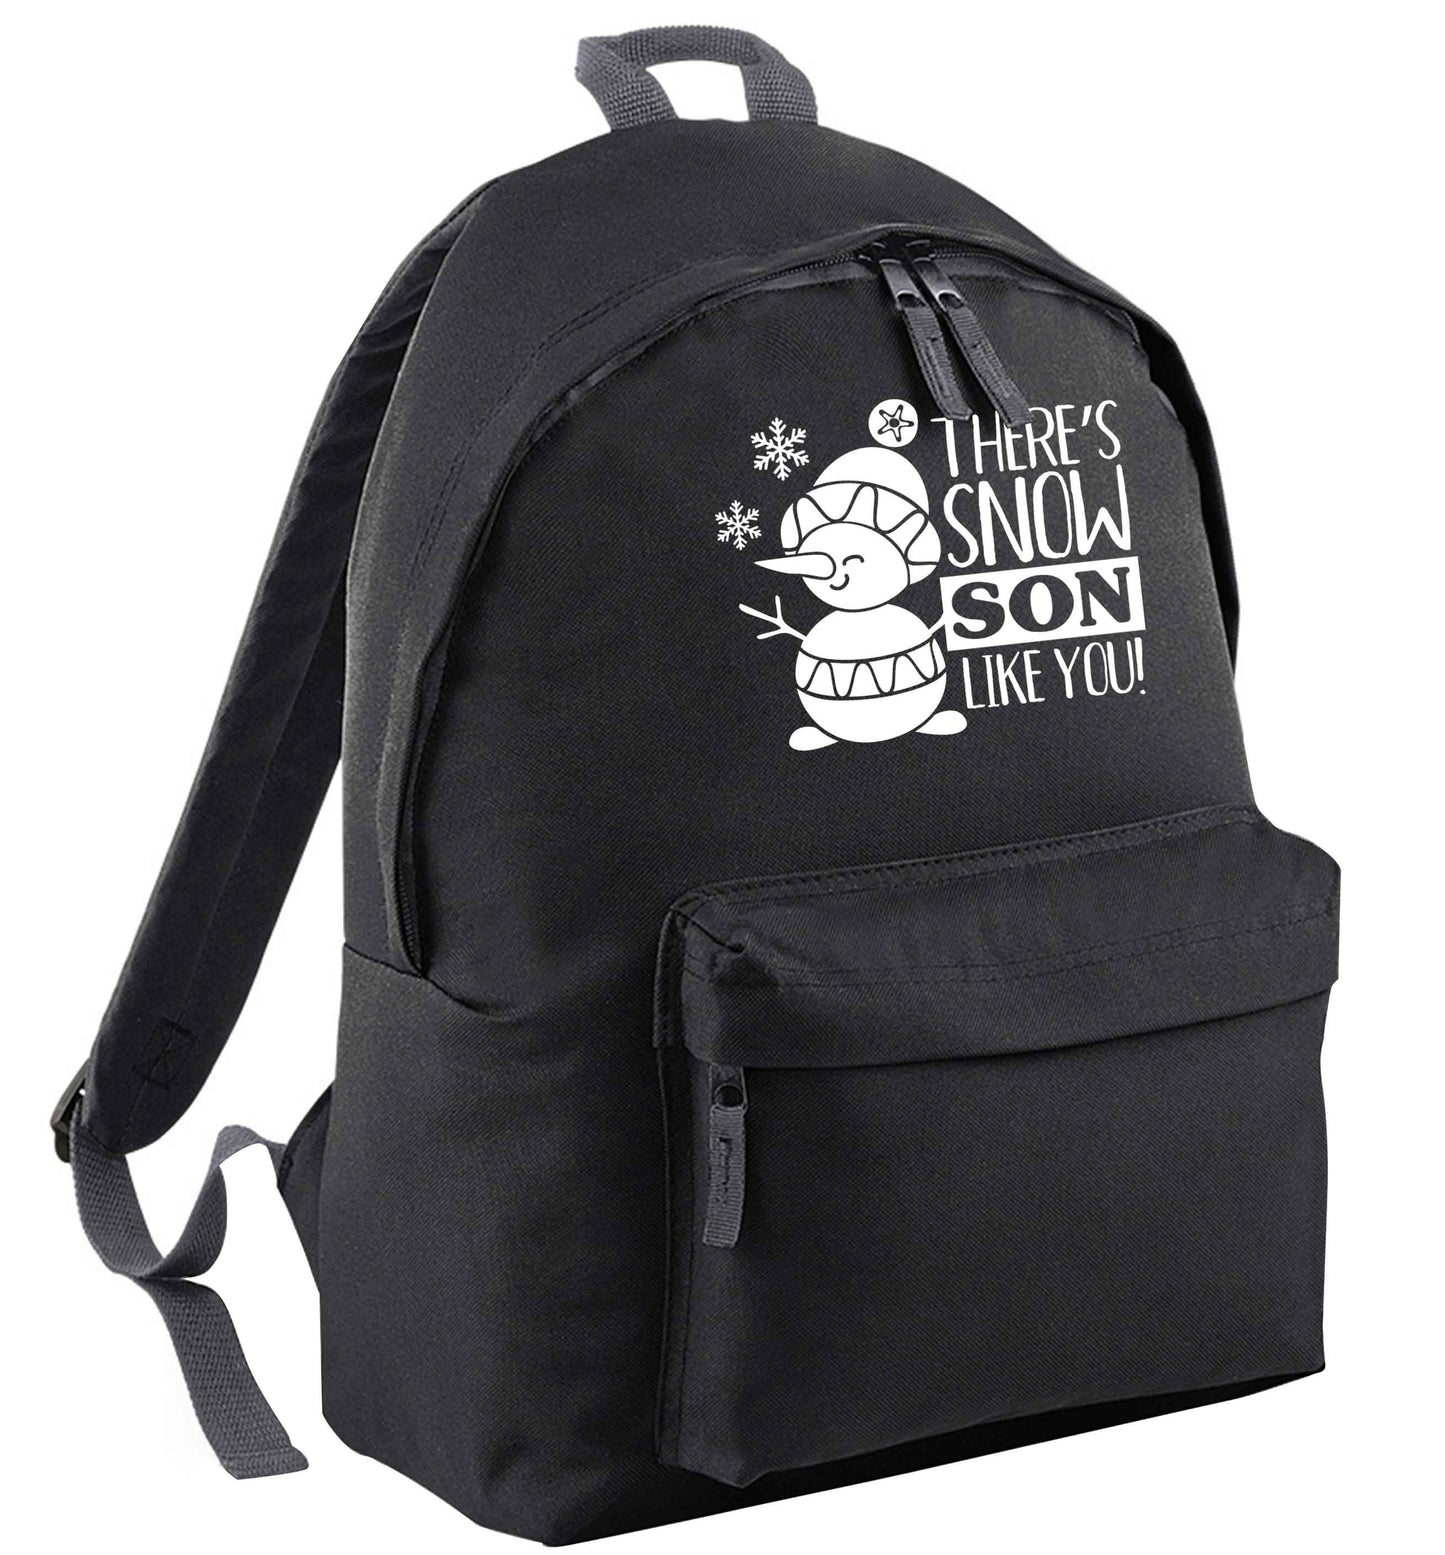 There's snow son like you black adults backpack